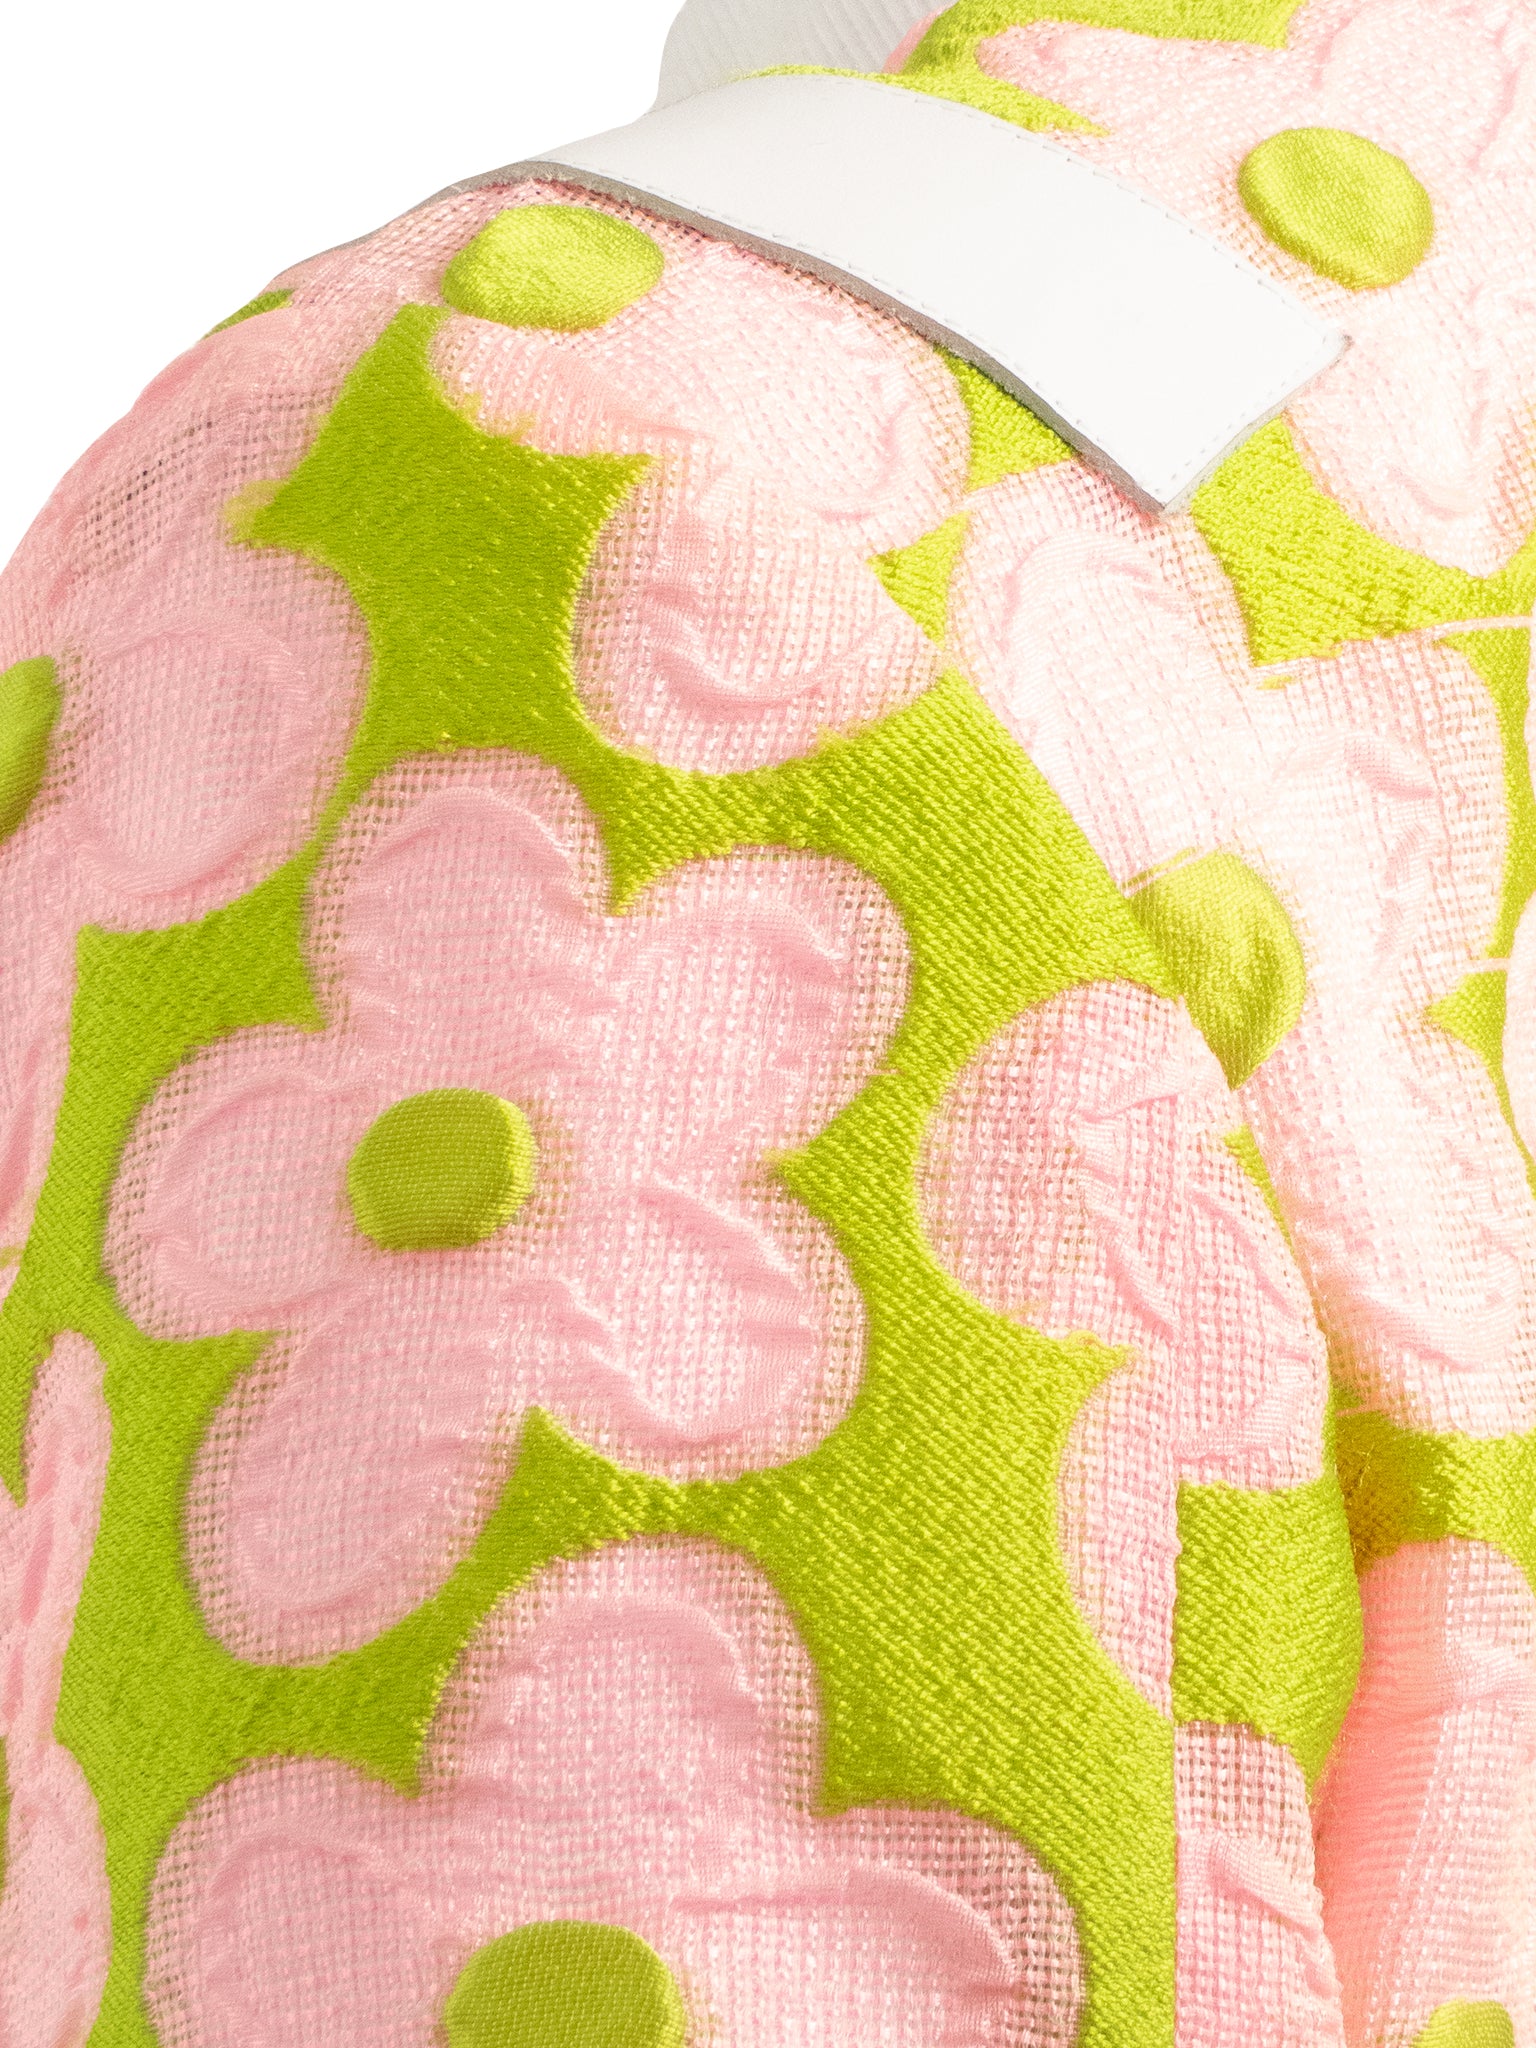 PINK & LIME DAISY EMBROIDERED BOMBER JACKET WITH WHITE LEATHER TRIMS